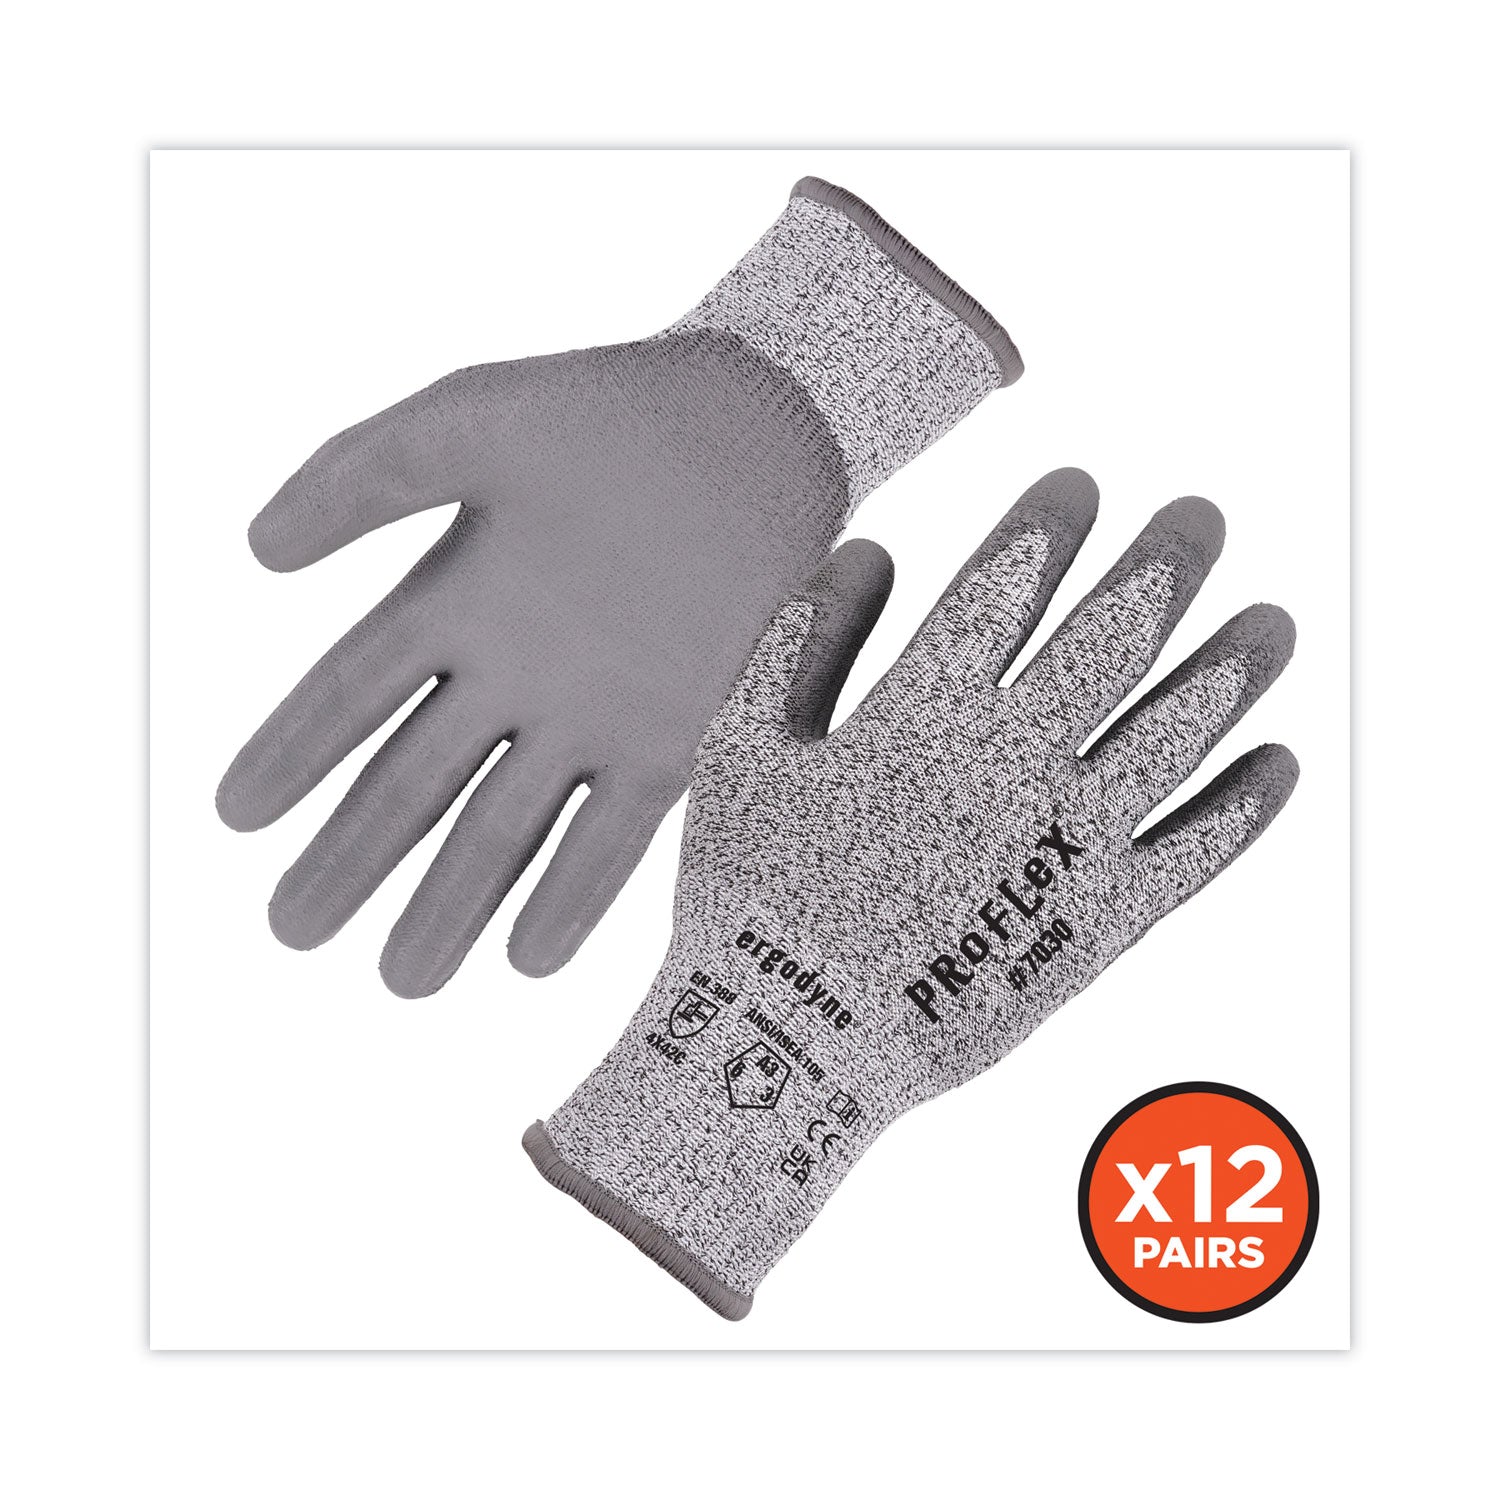 proflex-7030-ansi-a3-pu-coated-cr-gloves-gray-small-12-pairs-pack-ships-in-1-3-business-days_ego10452 - 2